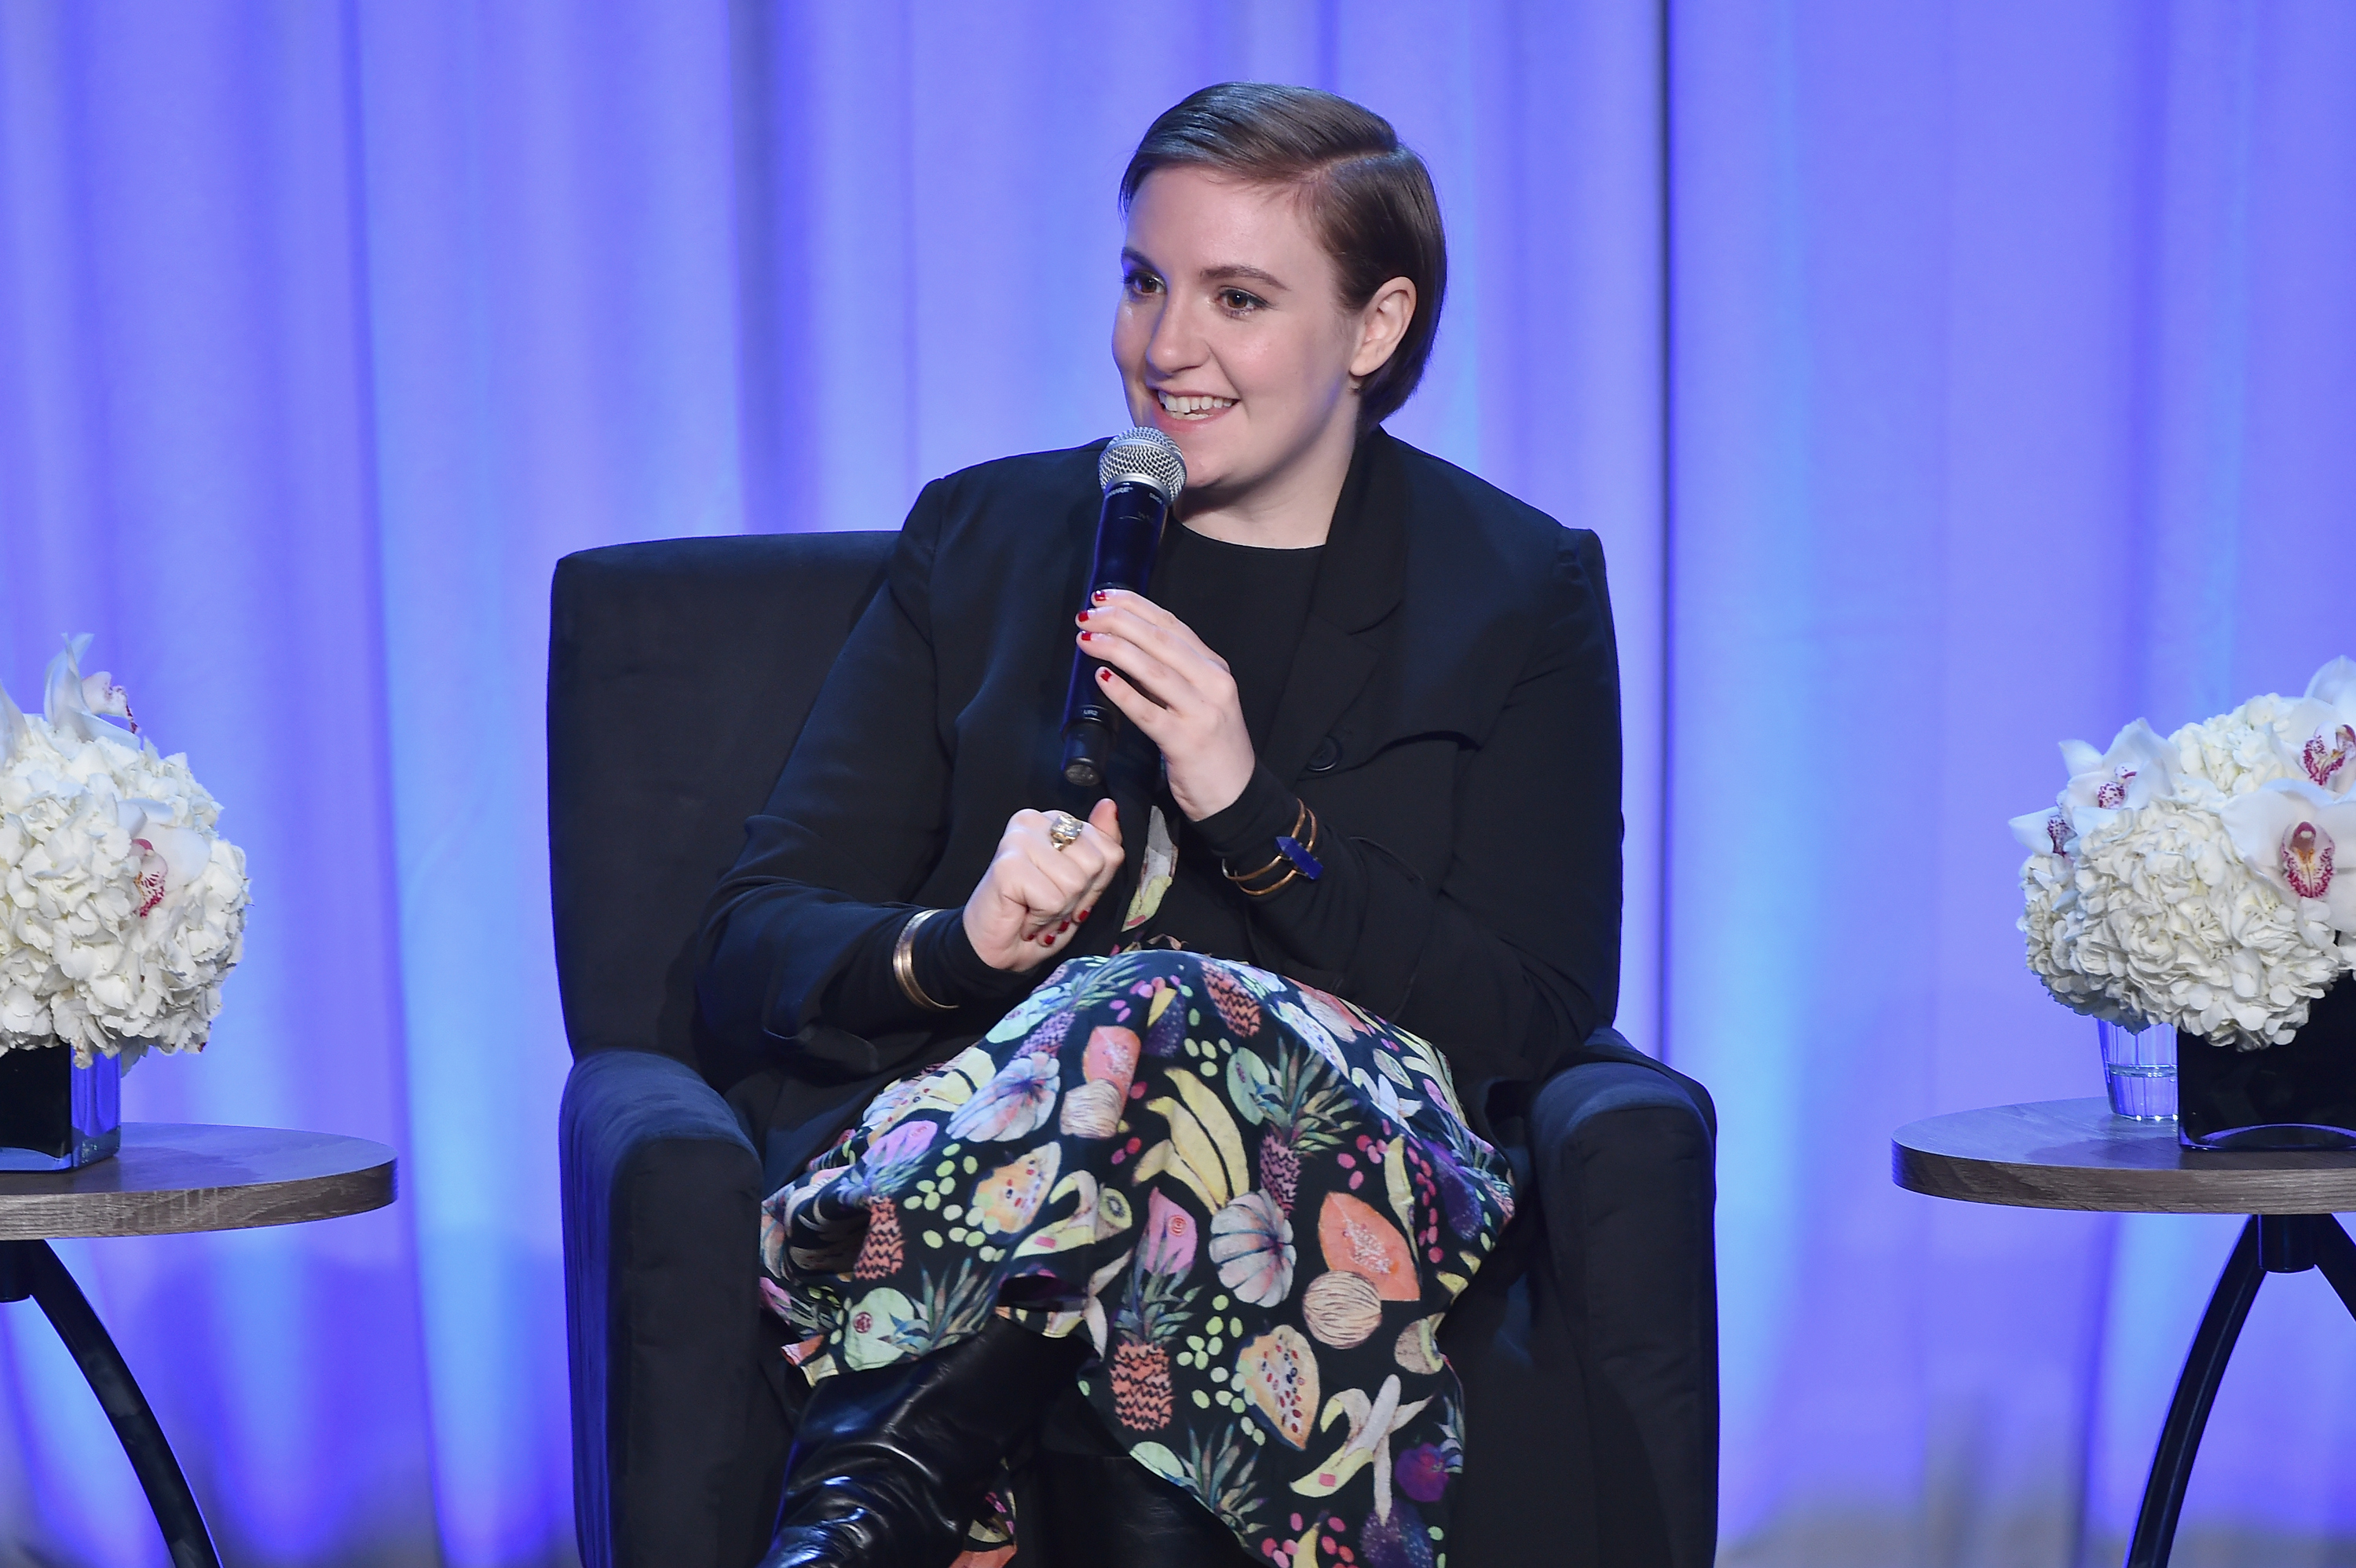 Lena Dunham speaks onstage at the American Magazine Media Conference on Feb. 2, 2016 in New York City. (Larry Busacca/Getty Images for Time Inc)